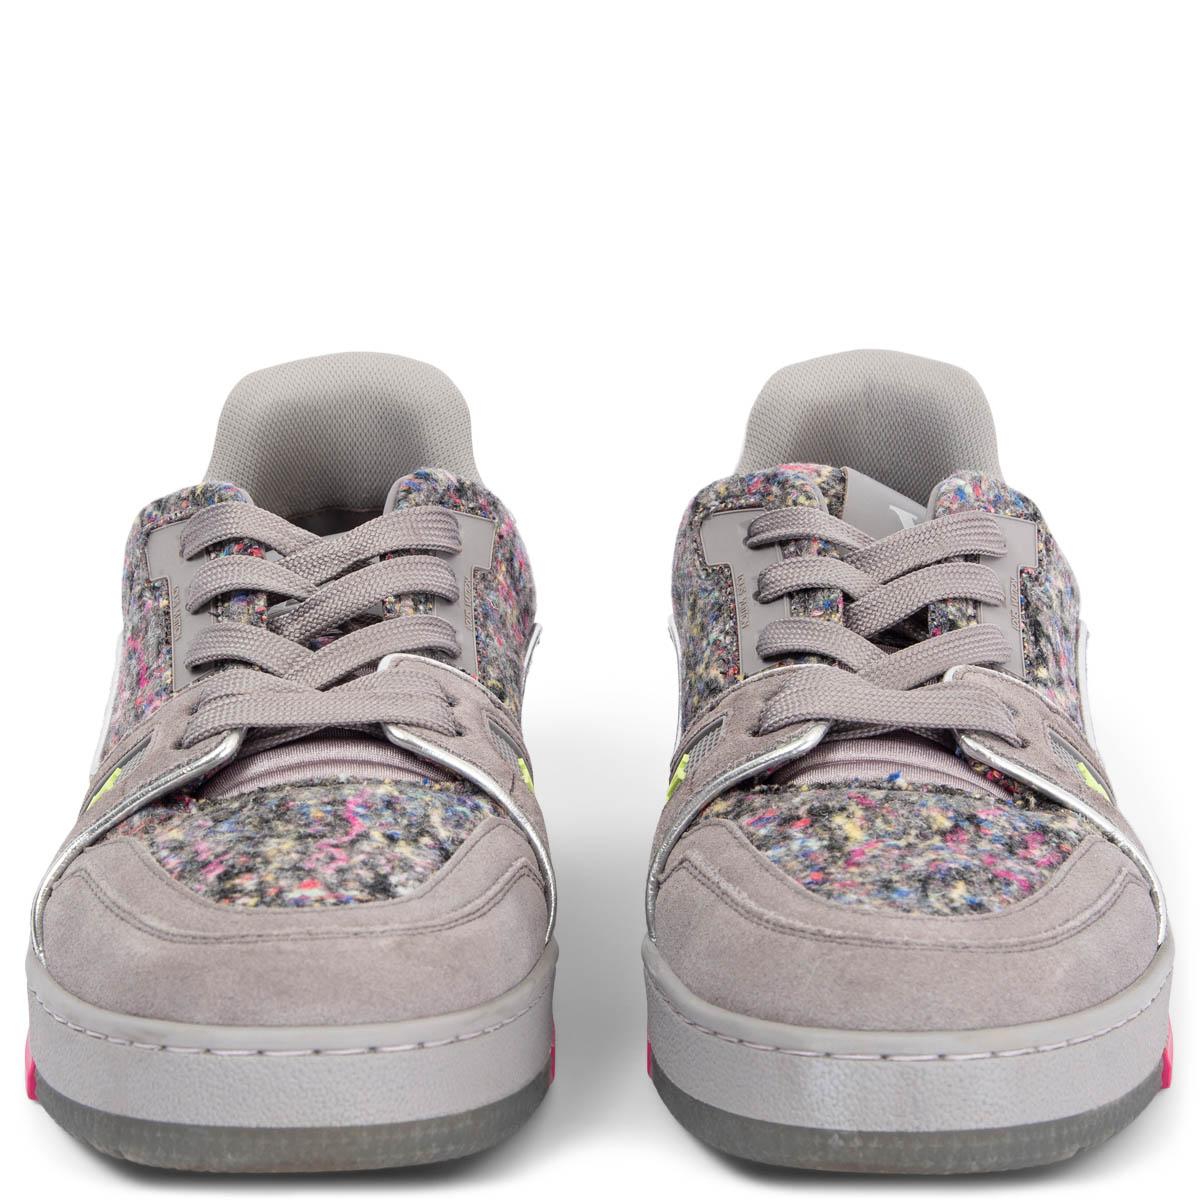 100% authentic Louis Vuitton x Virgil Abloh LV Trainer sneakers in grey and multicolor felt with suede trims and silver leather piping. Part of the felt collection these sneakers are made from 100% recycled materials only. Have been worn once or